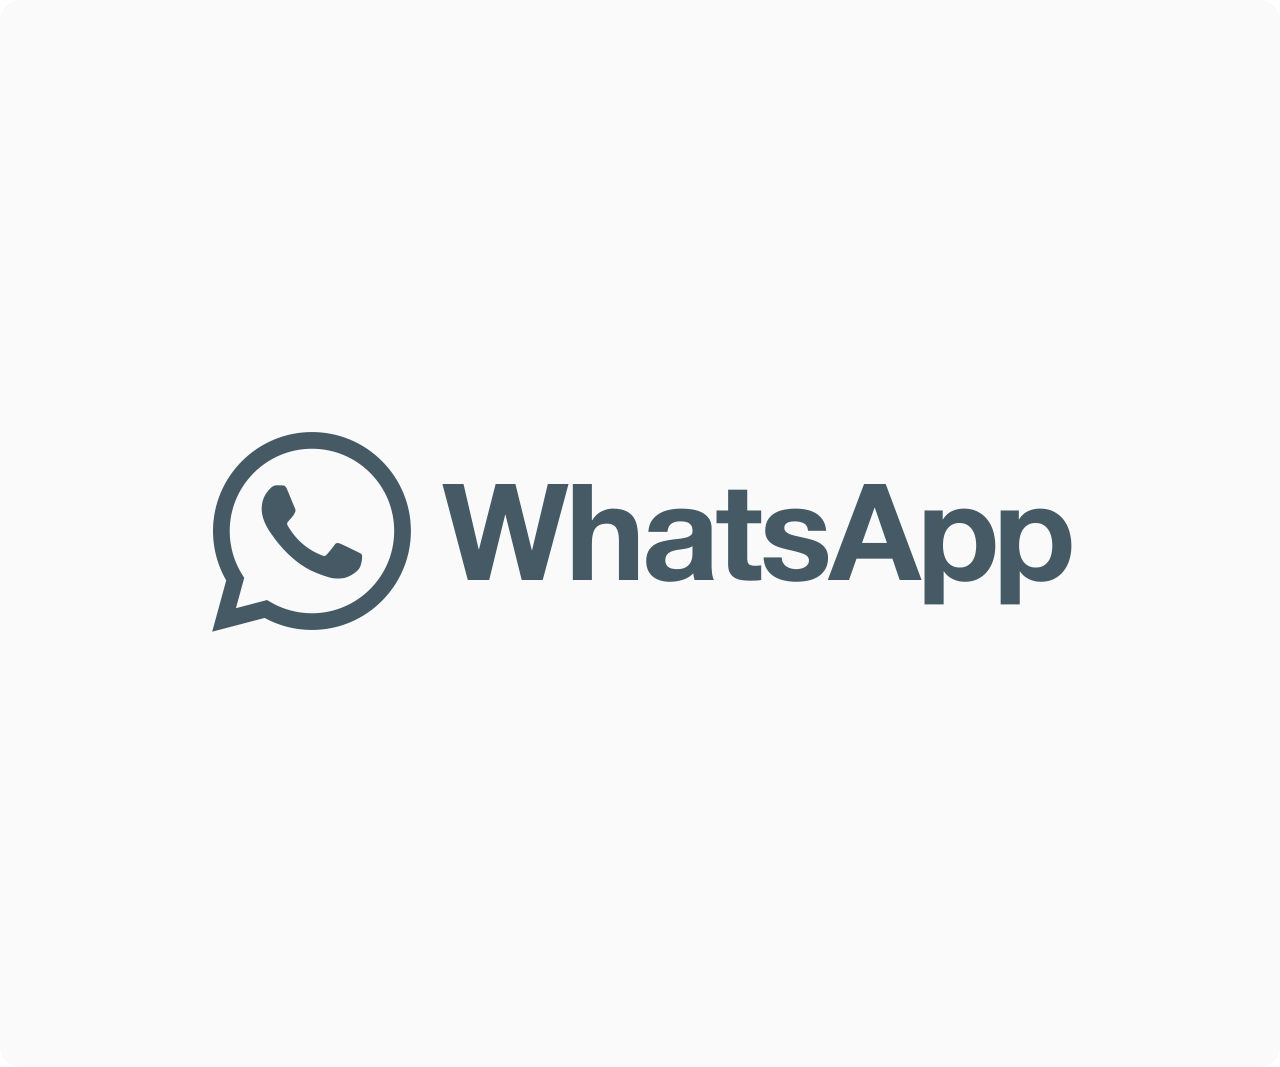 WhatsApp social media icon with wordmark to the side